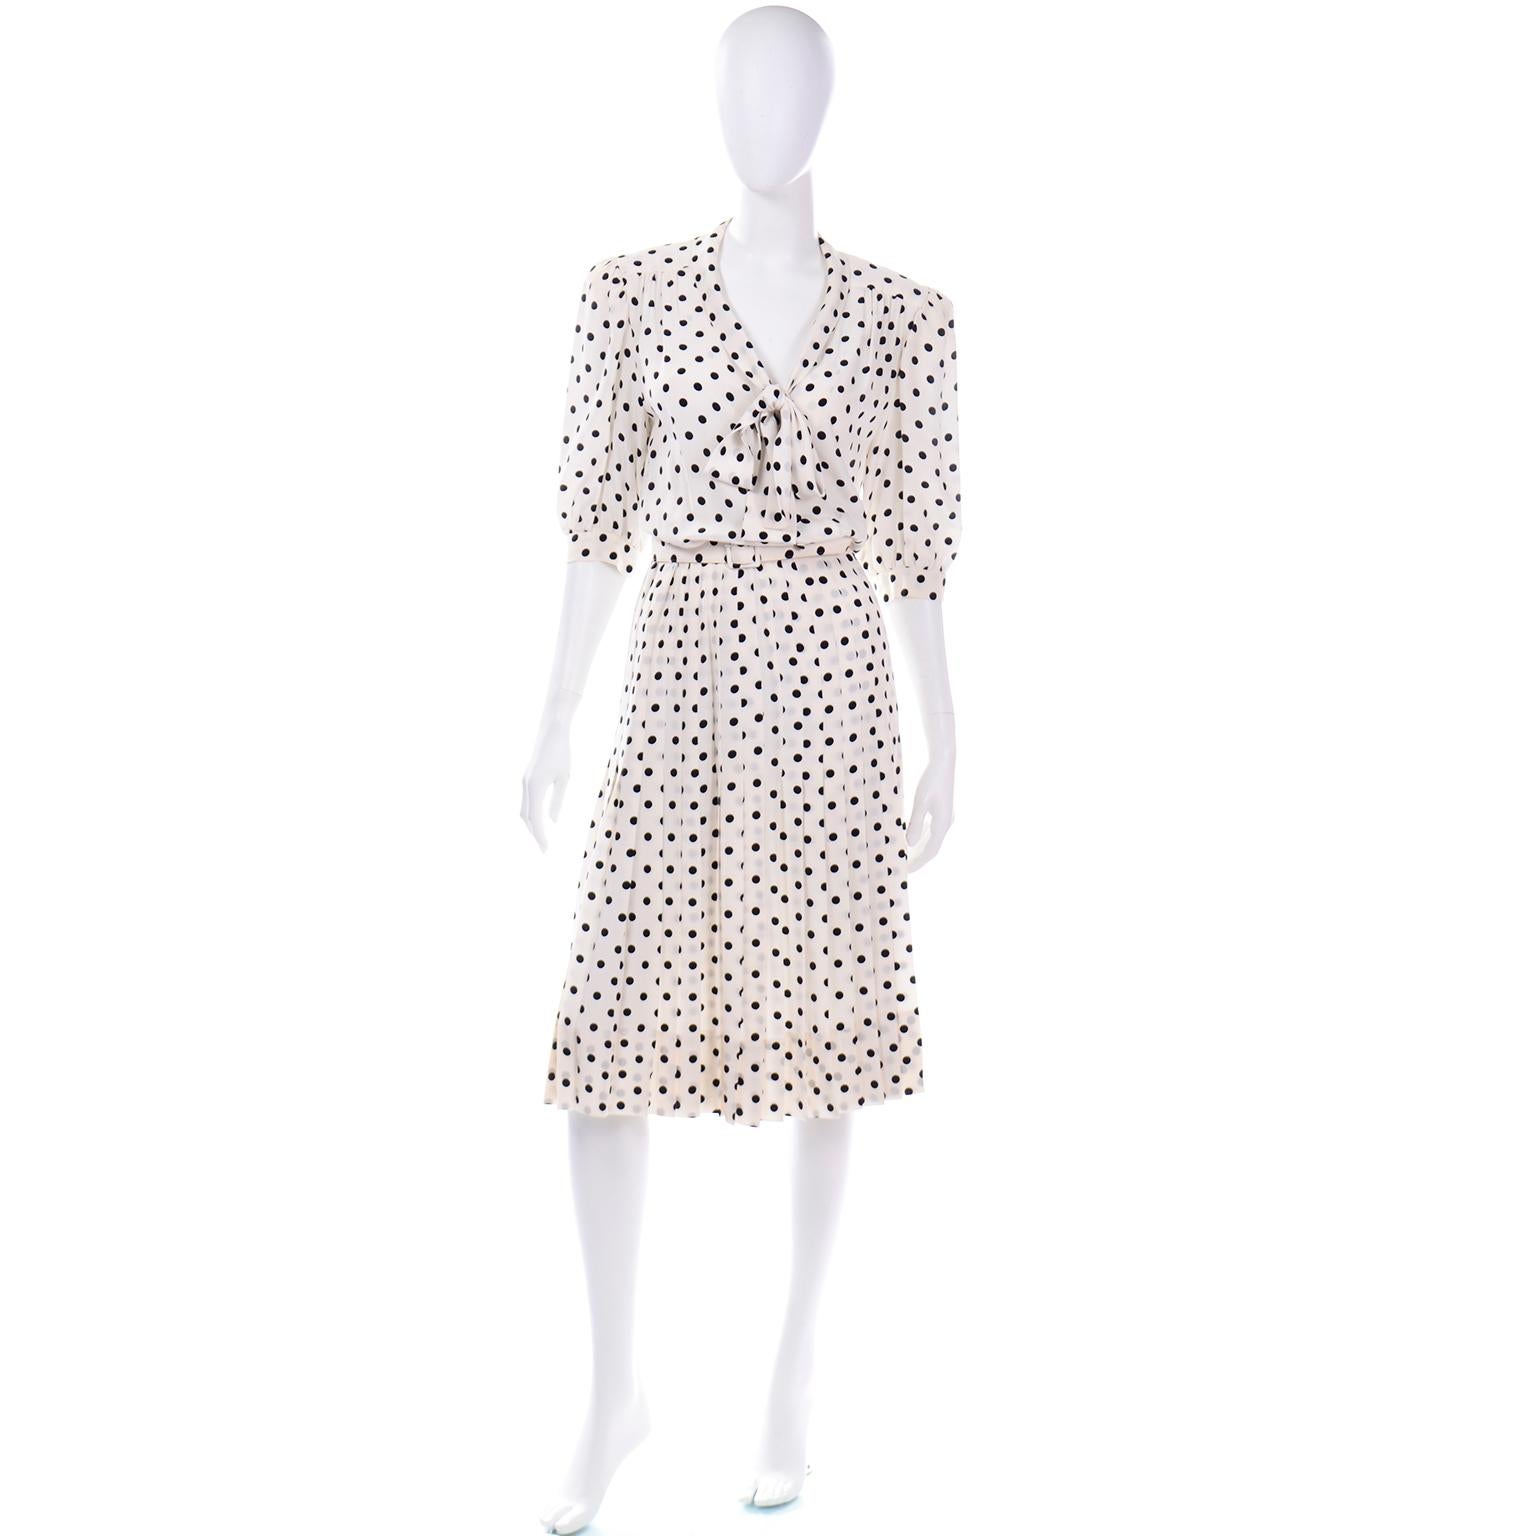 We love vintage Albert Nipon dresses and this 100% silk ivory and black polka dot dress is such an easy one to wear! The dress has a blousy top with gathered puff sleeves with buttons at cuffs. The flat pleated skirt is fitted through hip area then